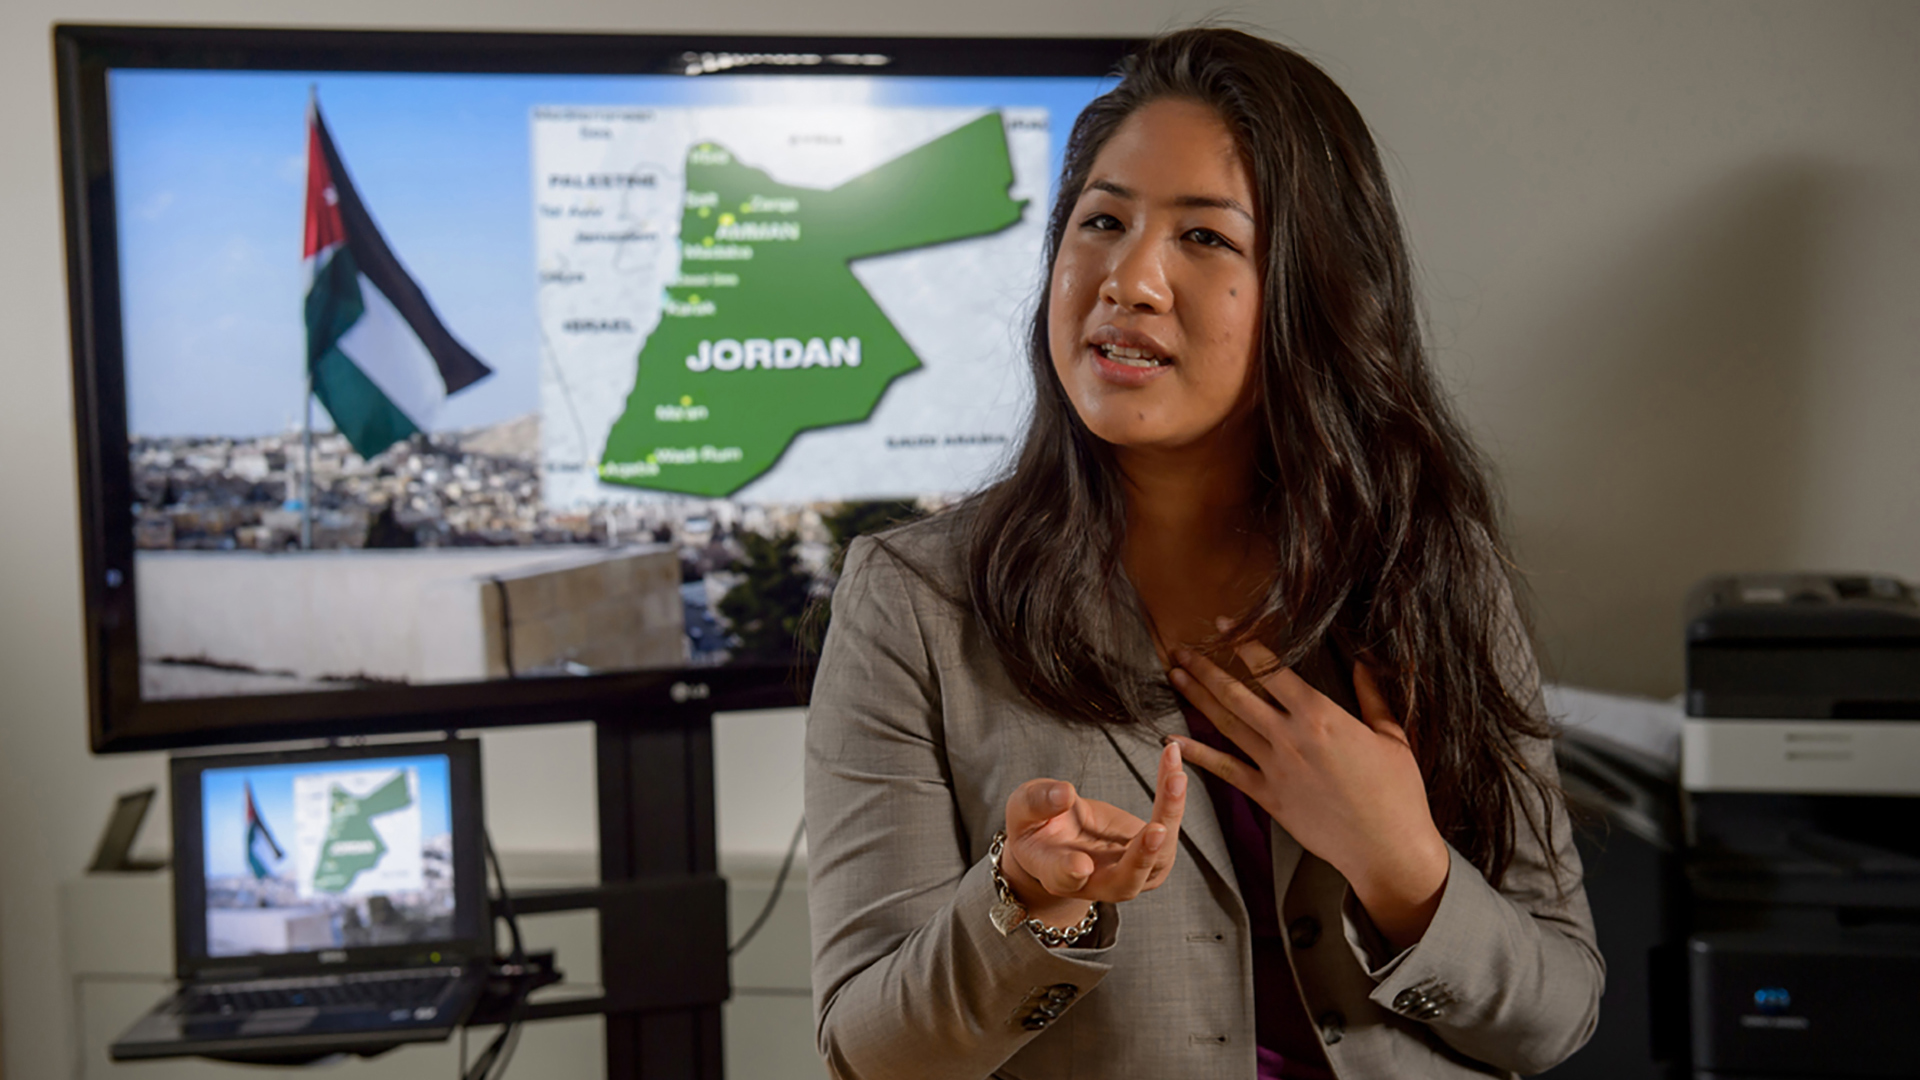 Student presents in front of a screen showing a map of Jordan 